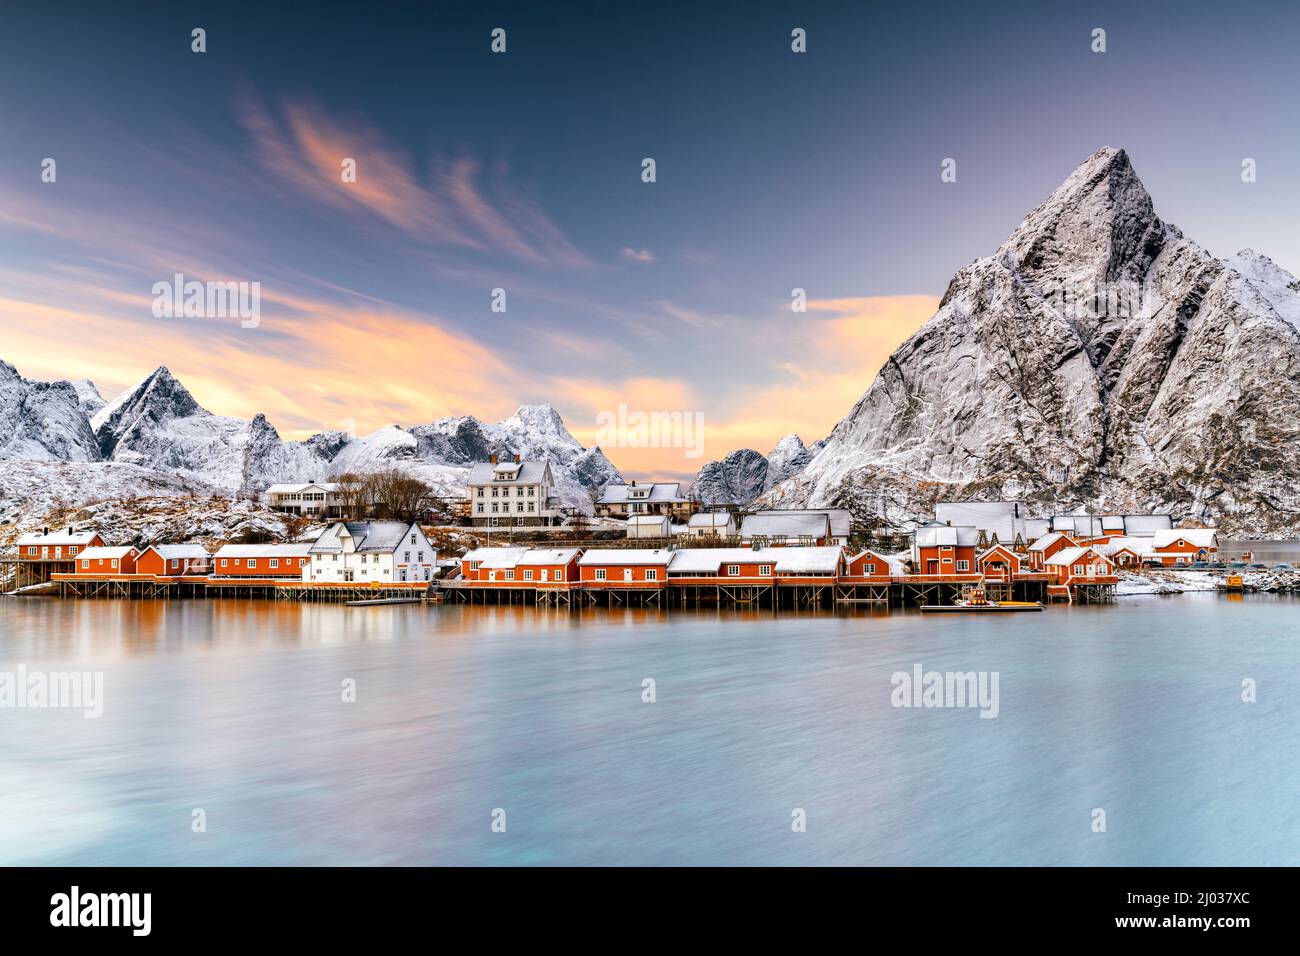 Winter sunset over snowcapped mountains and Sakrisoy village by the frozen sea, Reine, Nordland, Lofoten Islands, Norway, Scandinavia, Europe Stock Photo